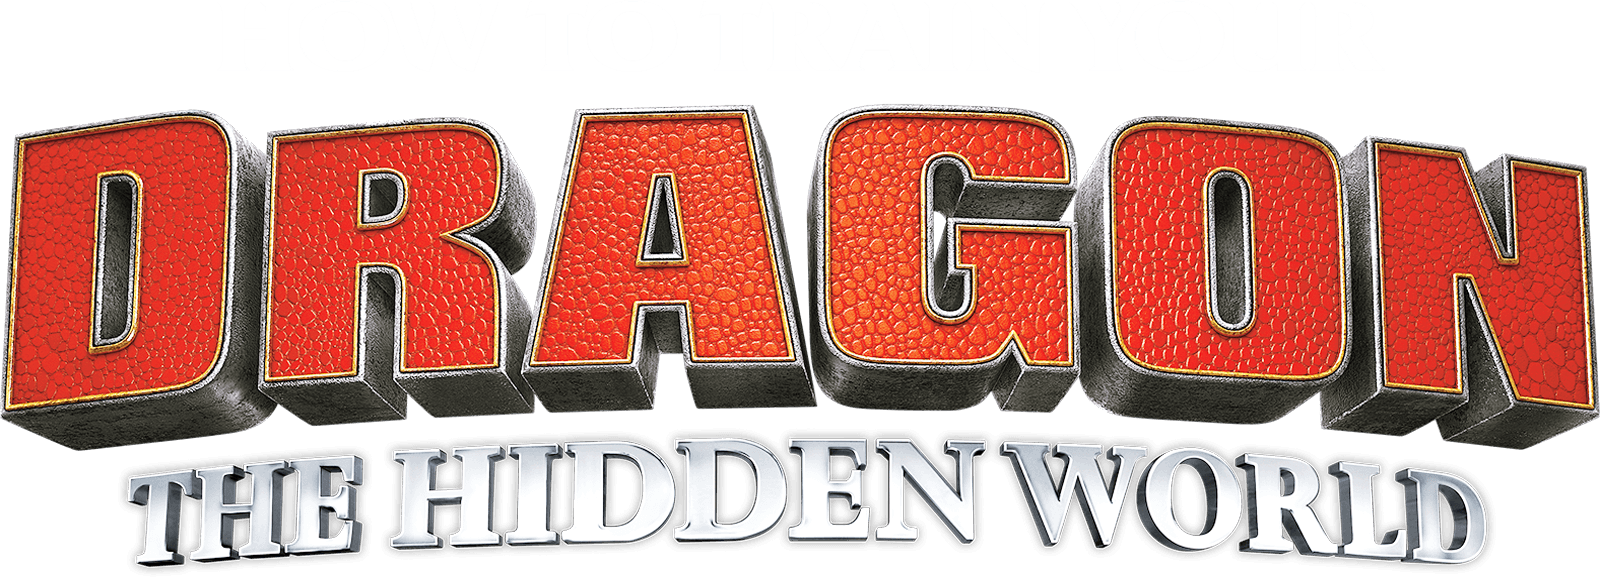 How to Train Your Dragon: The Hidden World logo